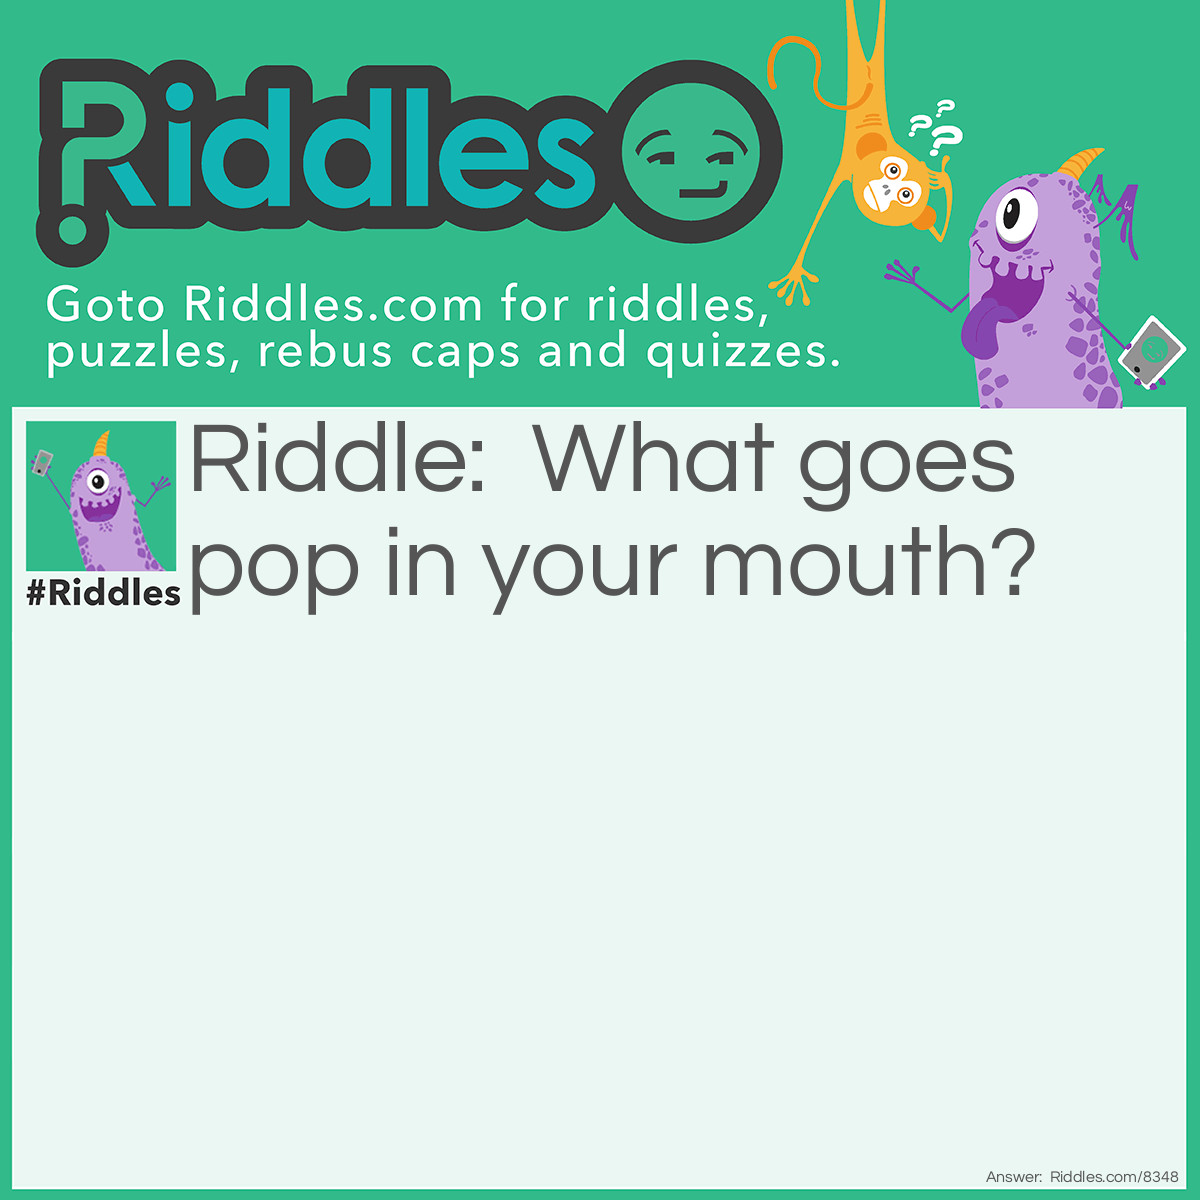 Riddle: What goes pop in your mouth? Answer: Popping Candy!